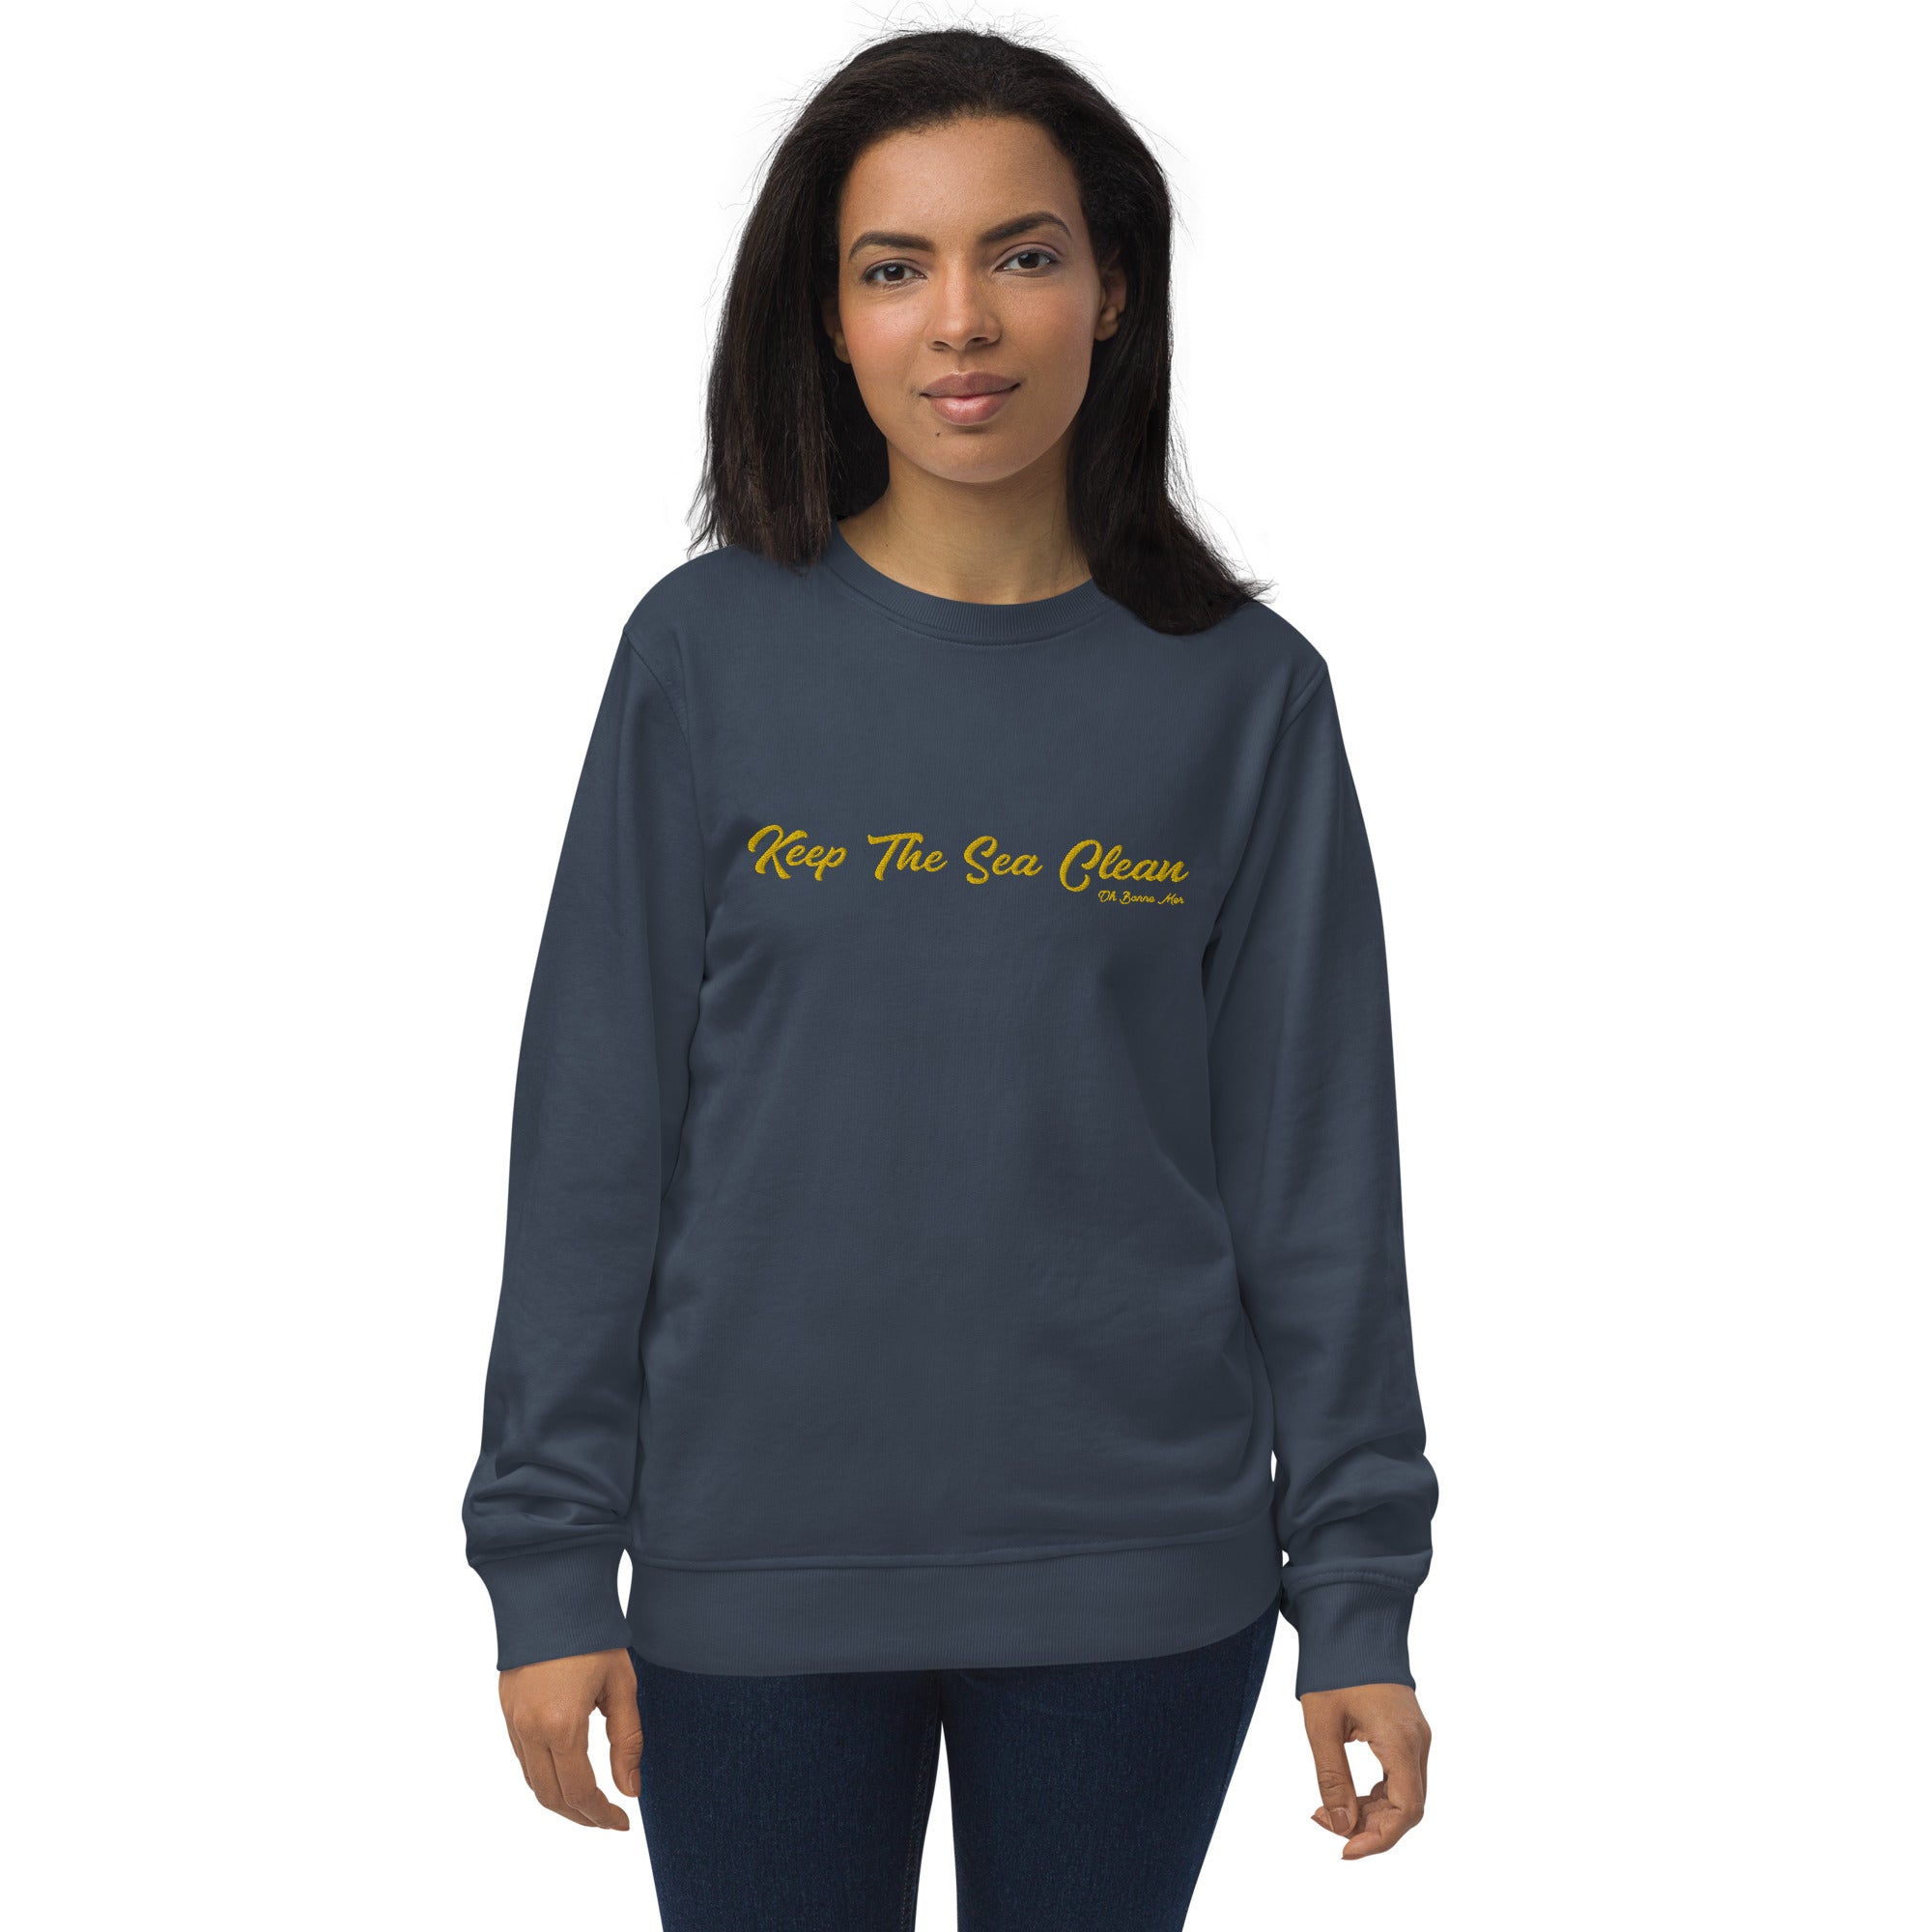 Unisex organic sweatshirt Keep The Sea Clean large gold embroidered pattern